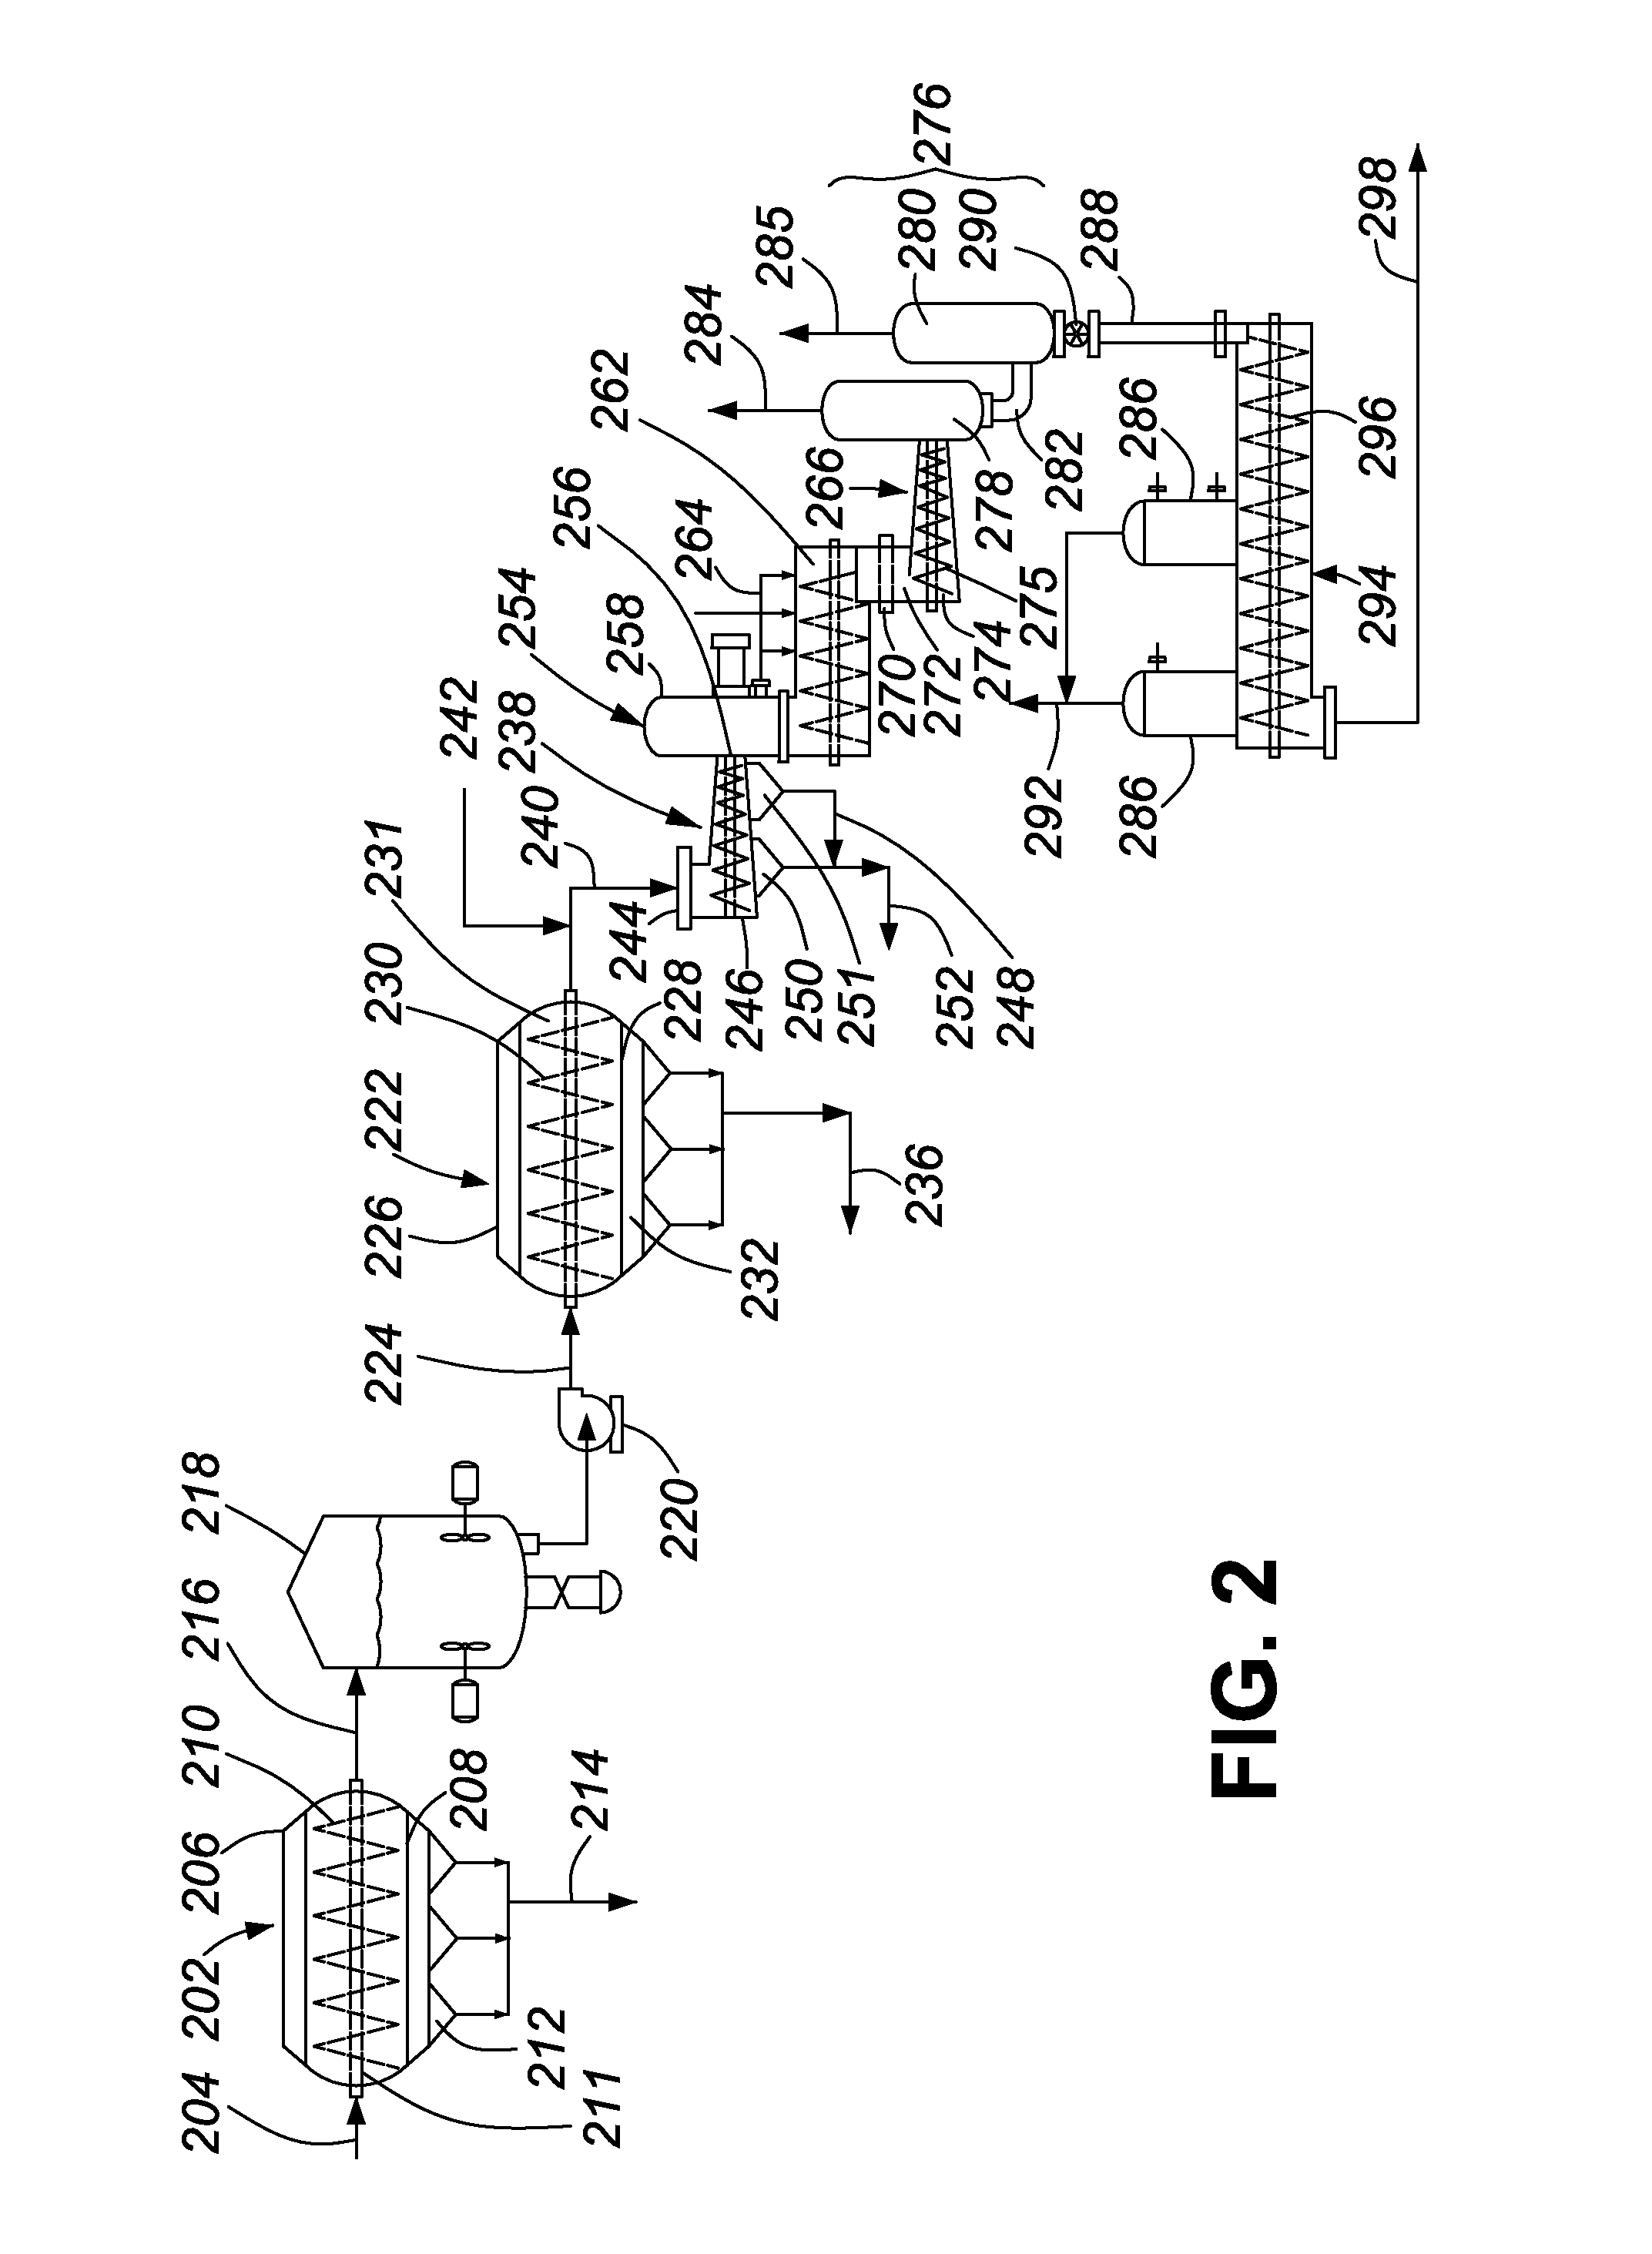 Method for low water hydrolysis or pretreatment of polysaccharides in a lignocellulosic feedstock